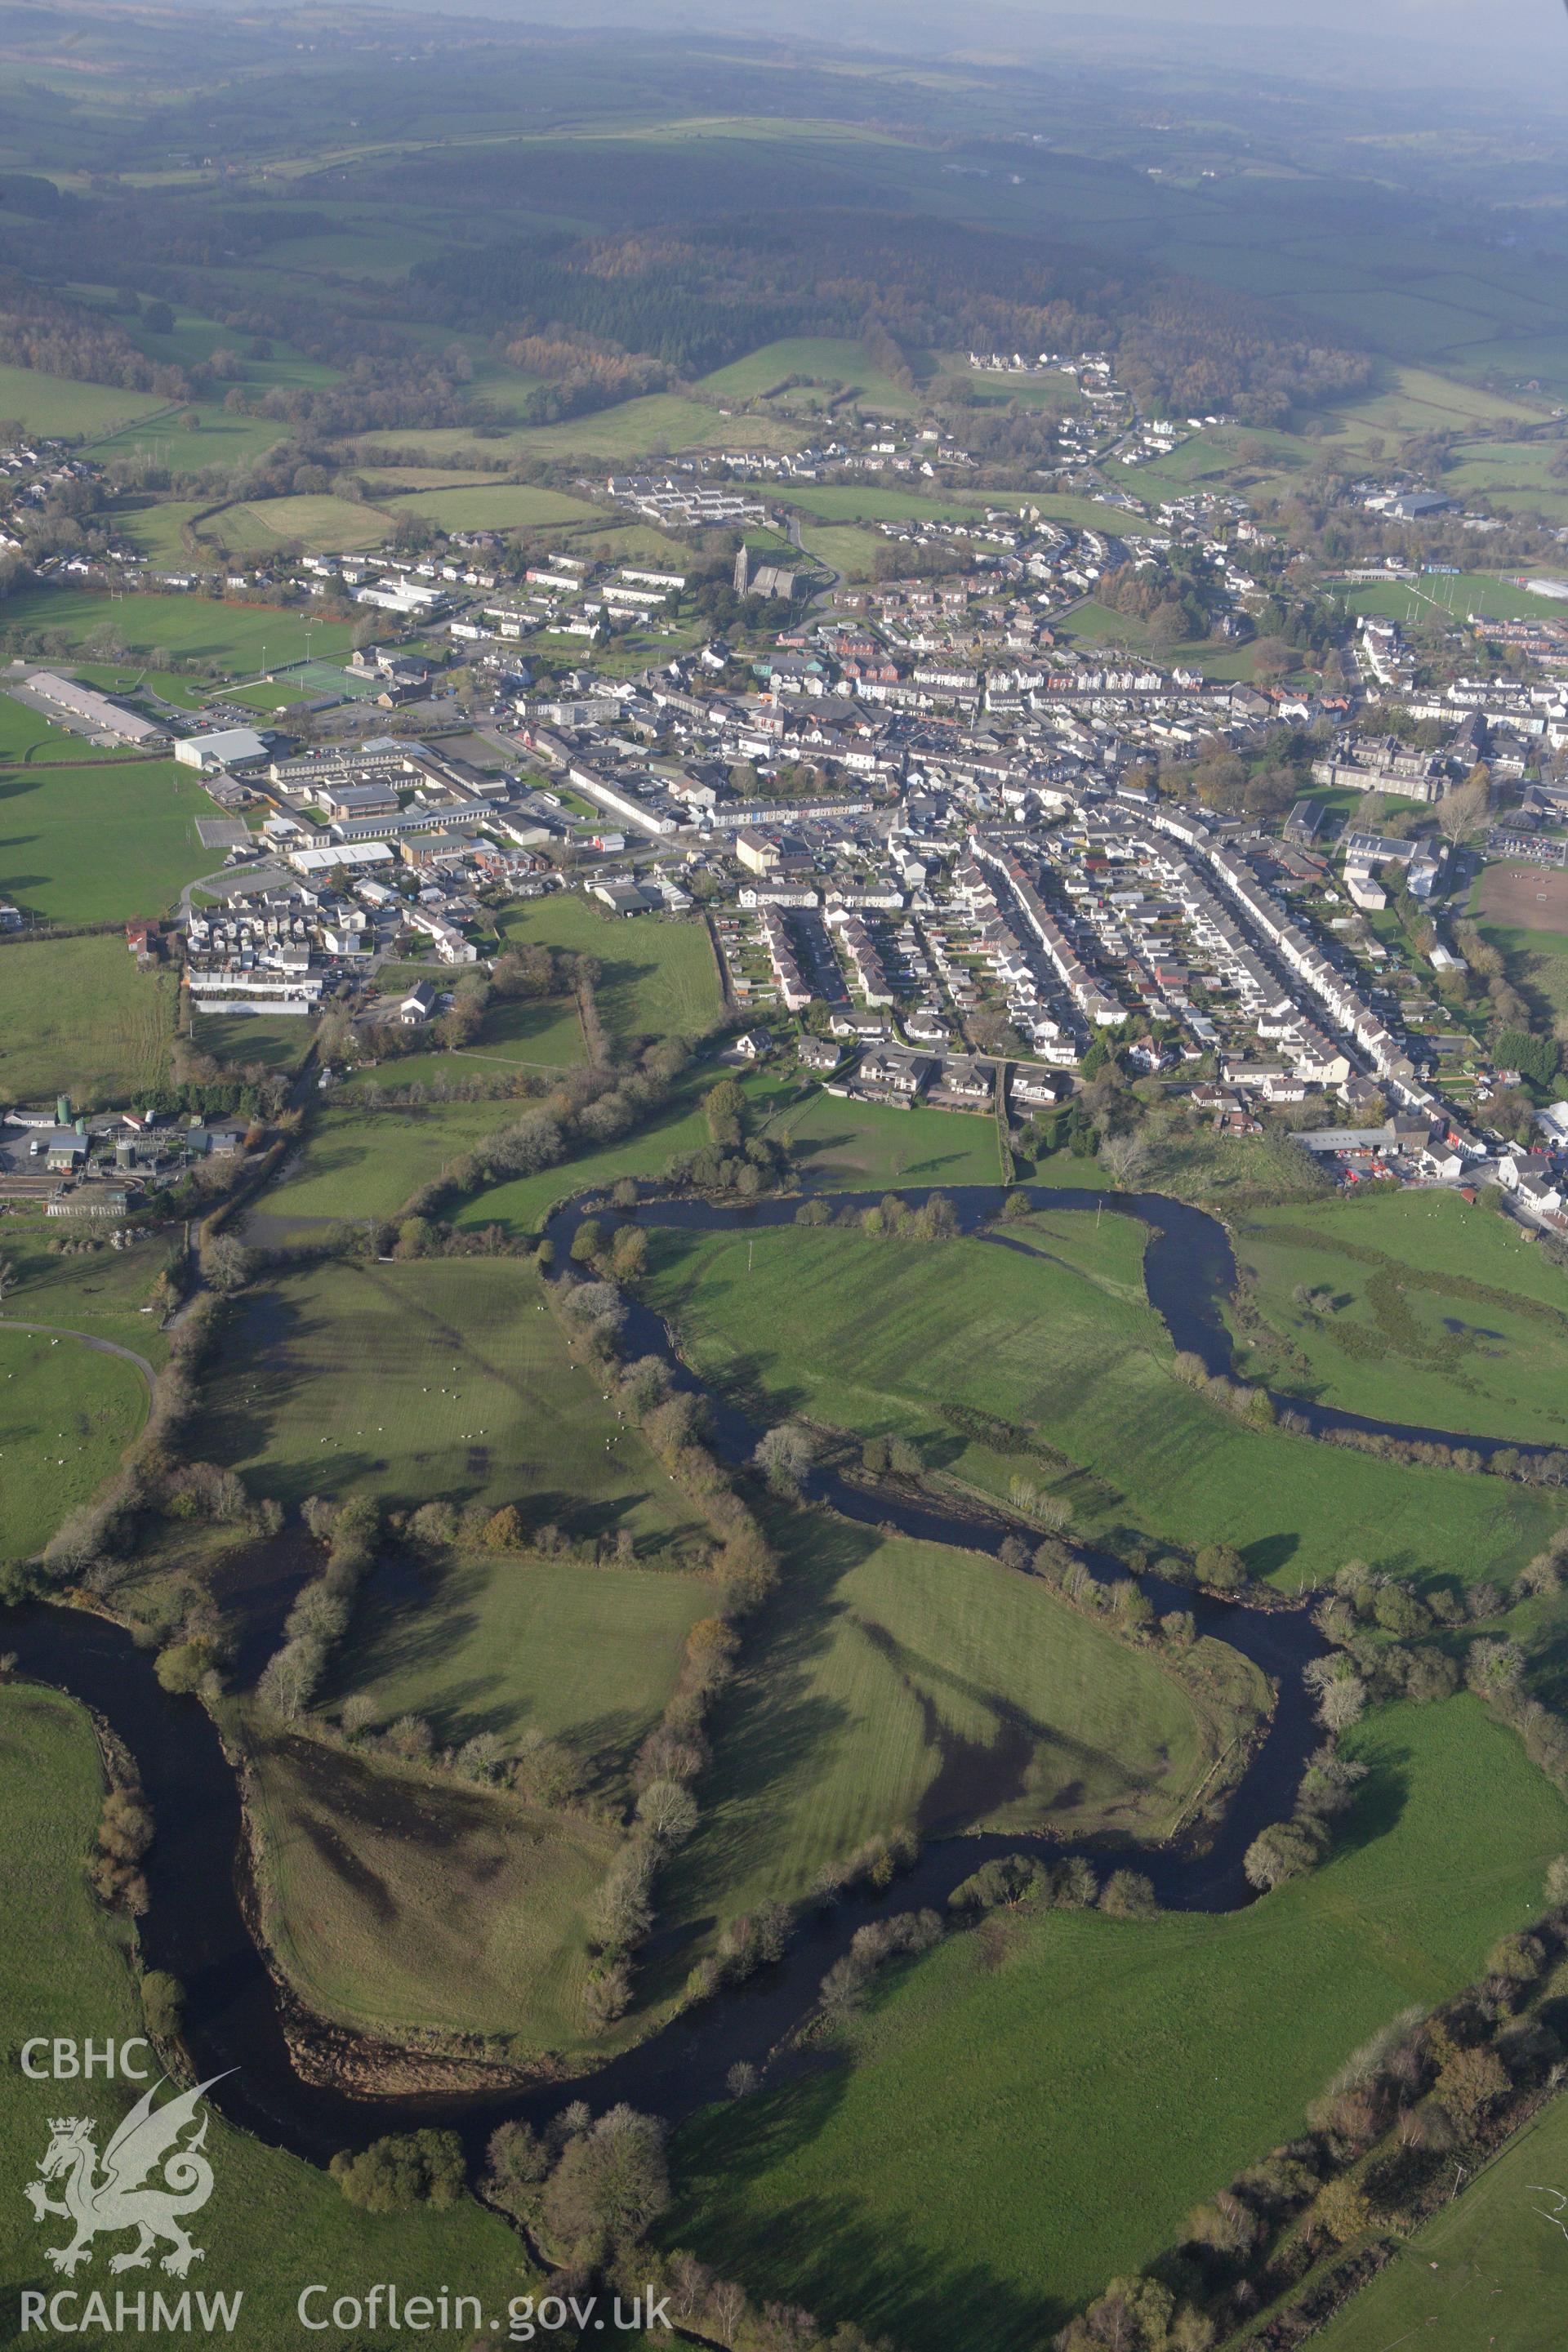 RCAHMW colour oblique aerial photograph of Lampeter Borough, viewed from the south-east. Taken on 09 November 2009 by Toby Driver